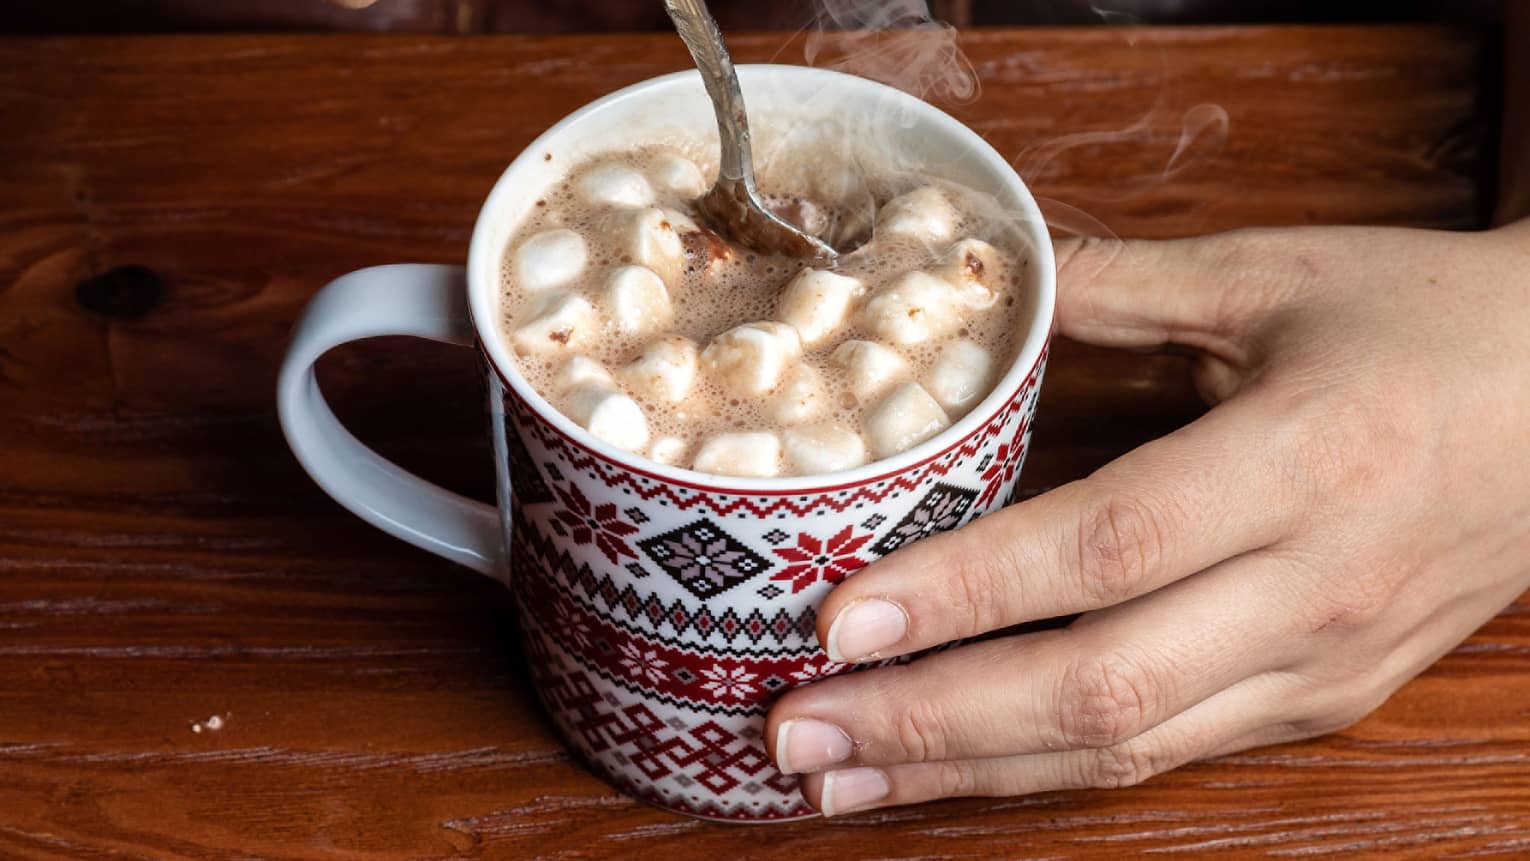 Close up of two hands holding and stirring hot chocolate with marshmallows in a patterned mug